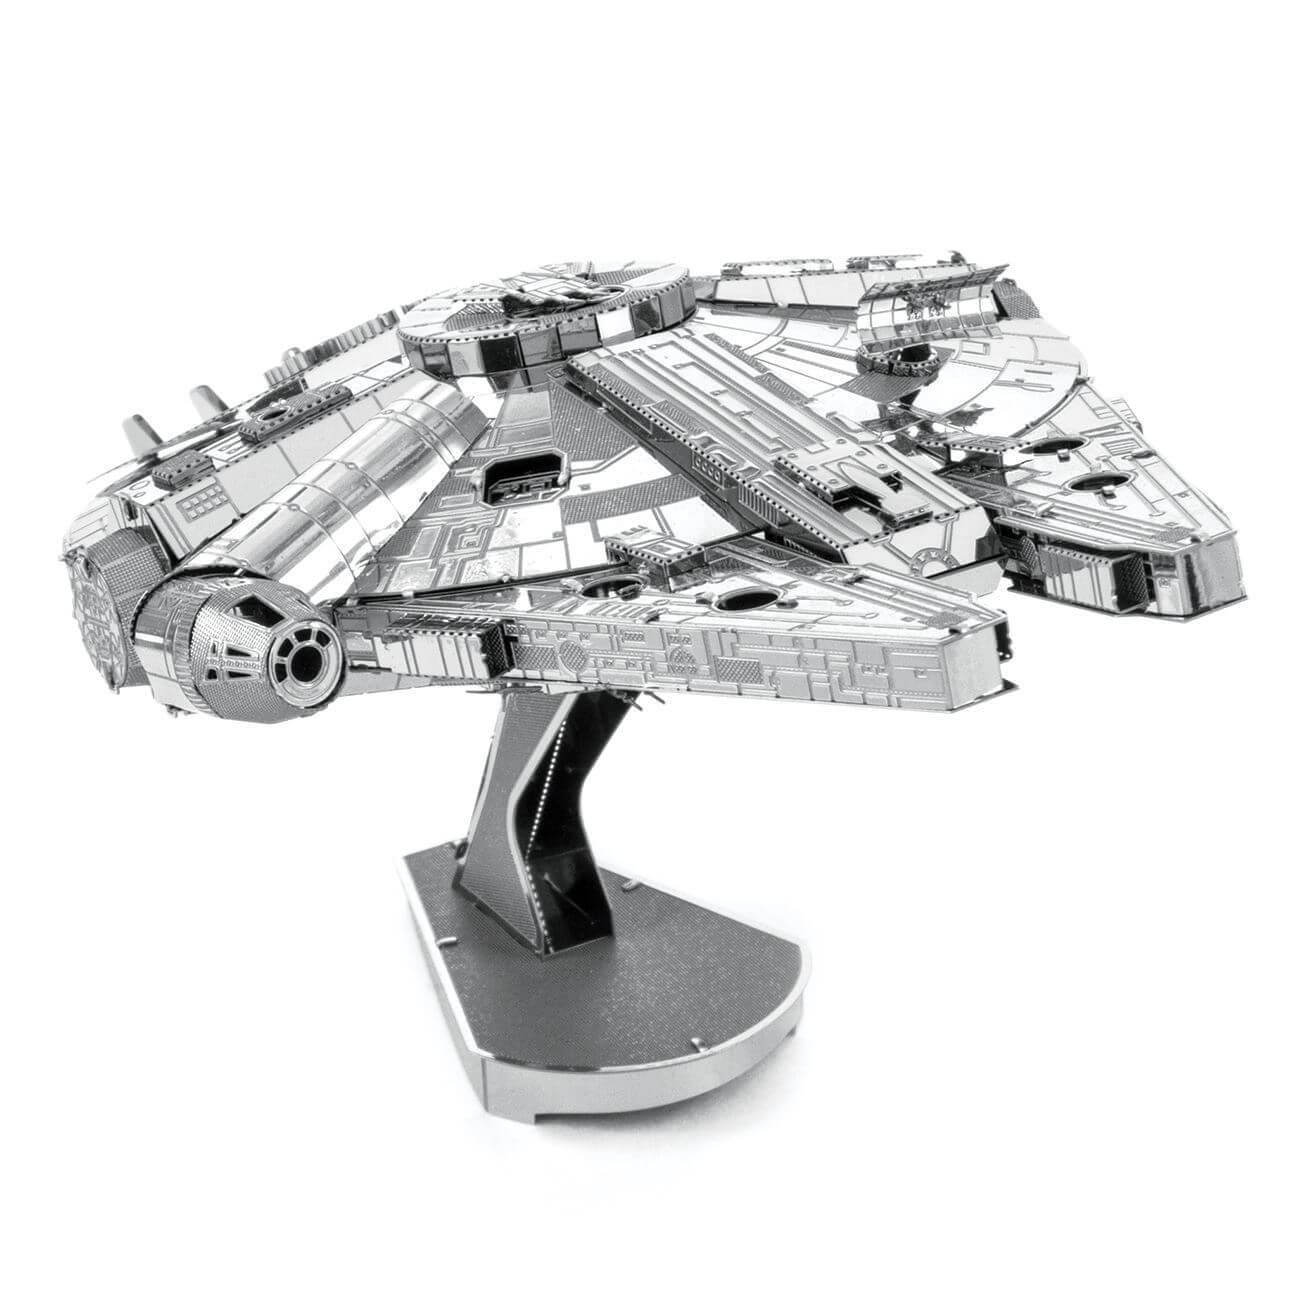 Front view of the millennium falcon.